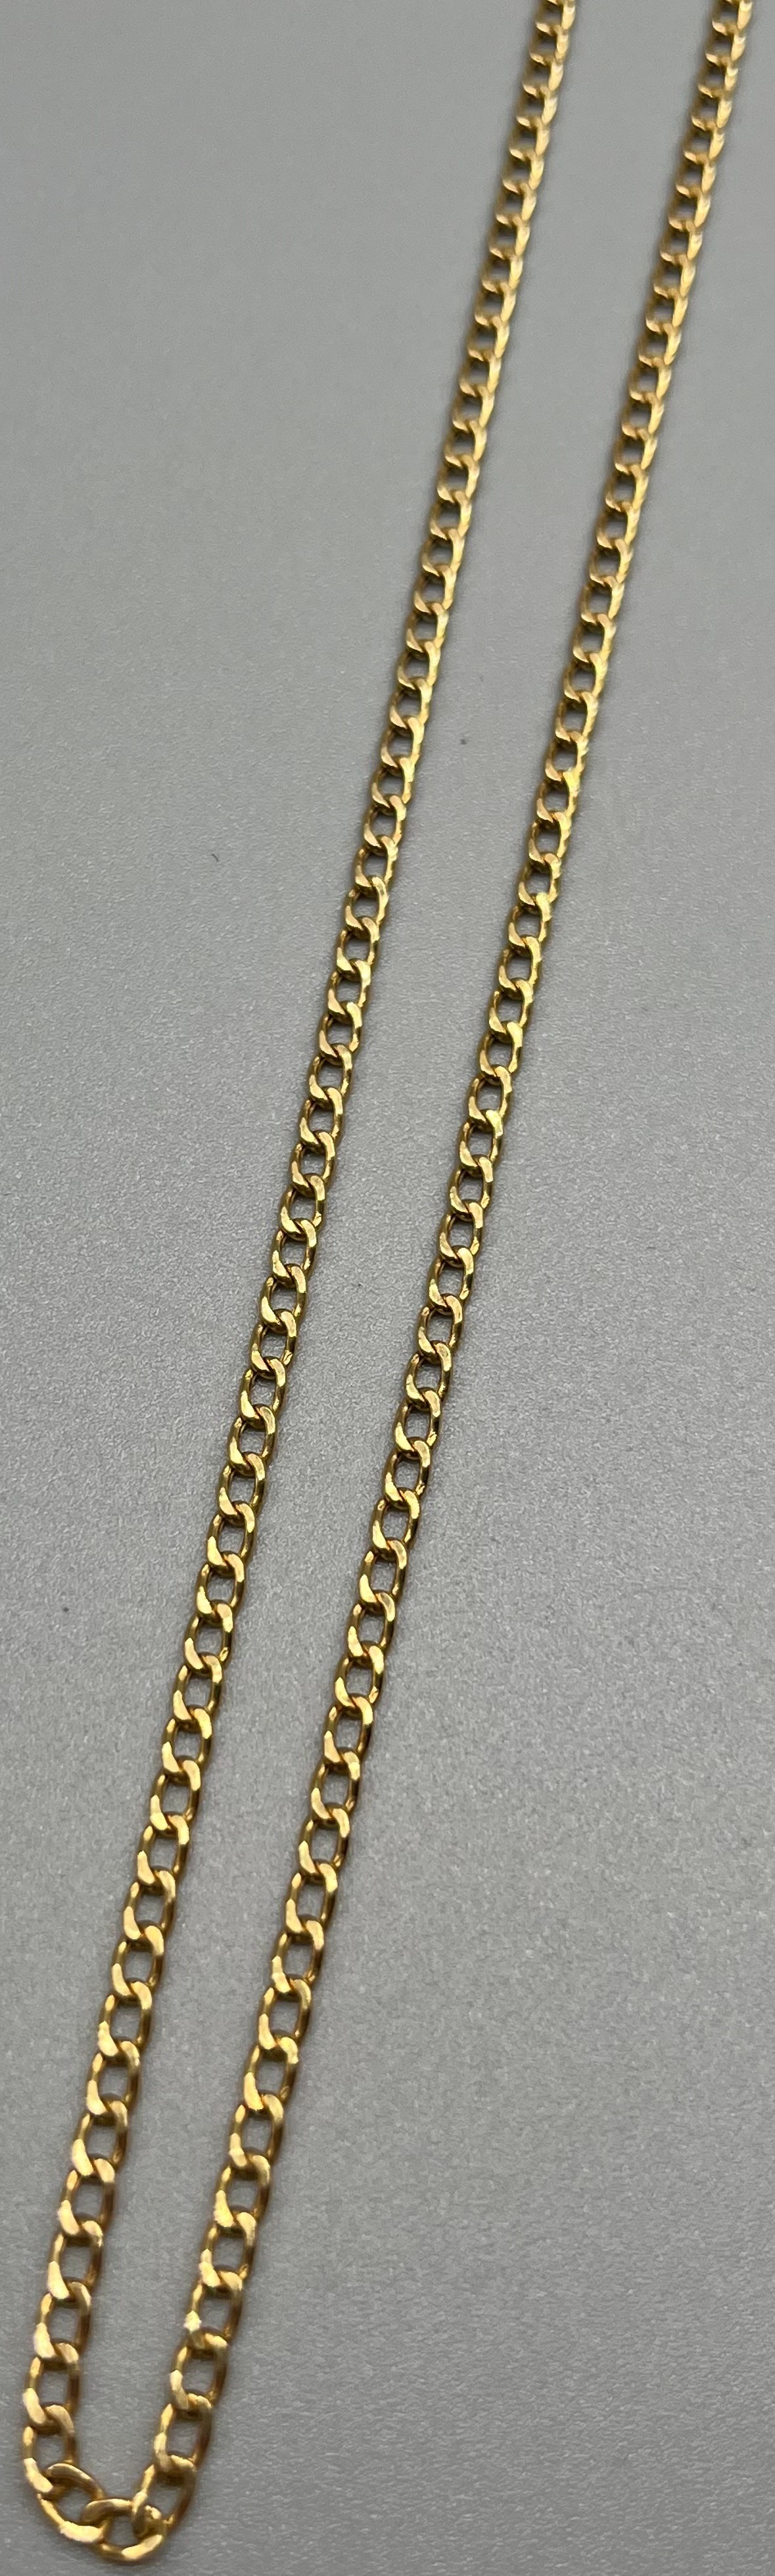 9ct yellow gold curb necklace. [2.91 grams] [27cm drop] - Image 2 of 3